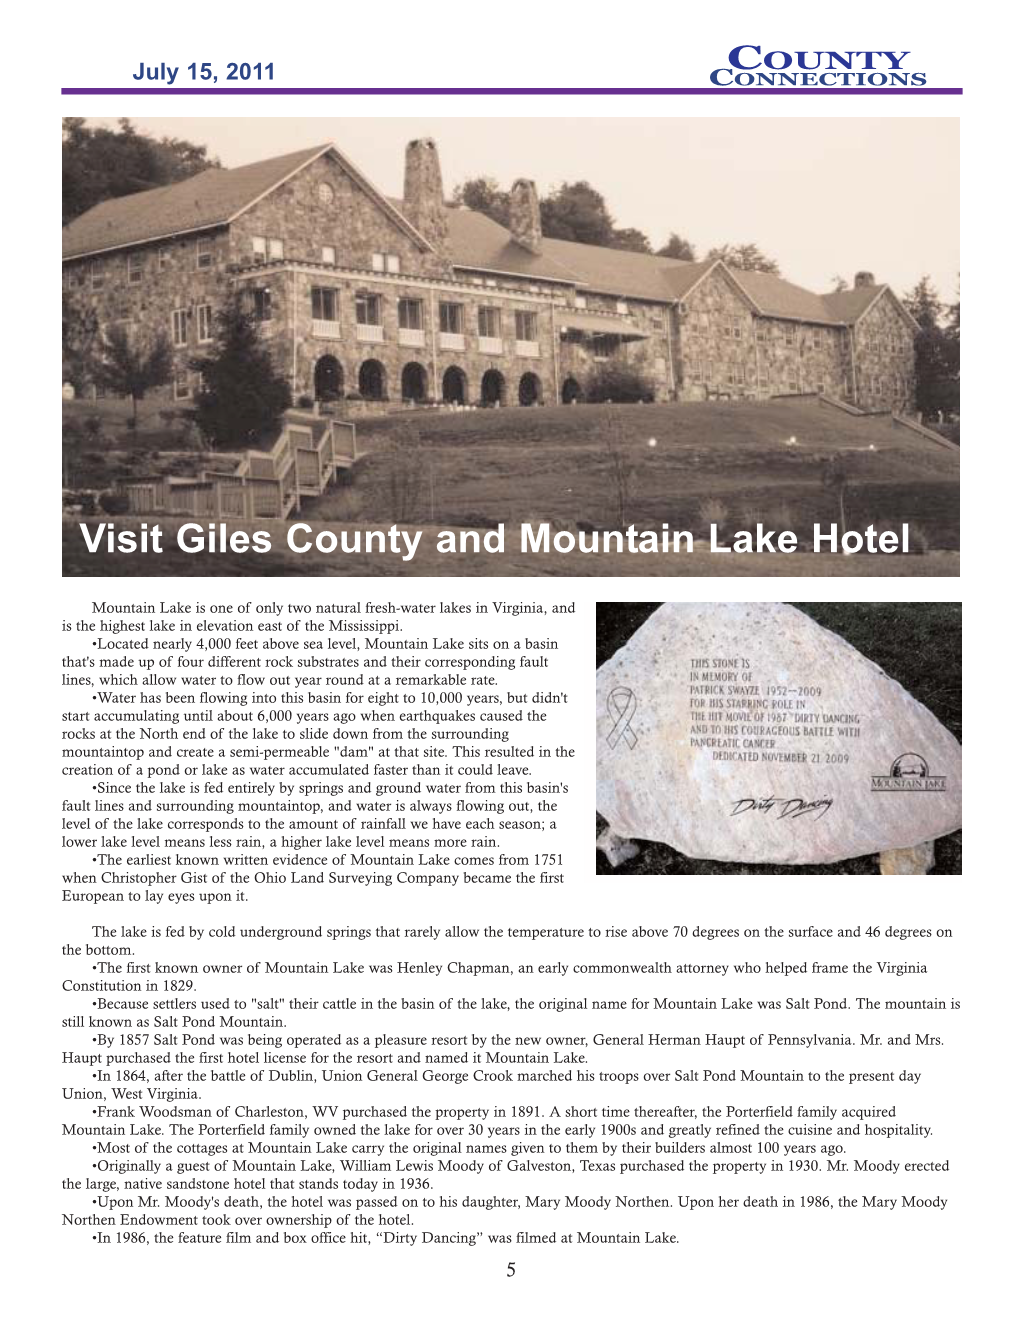 Visit Giles County and Mountain Lake Hotel